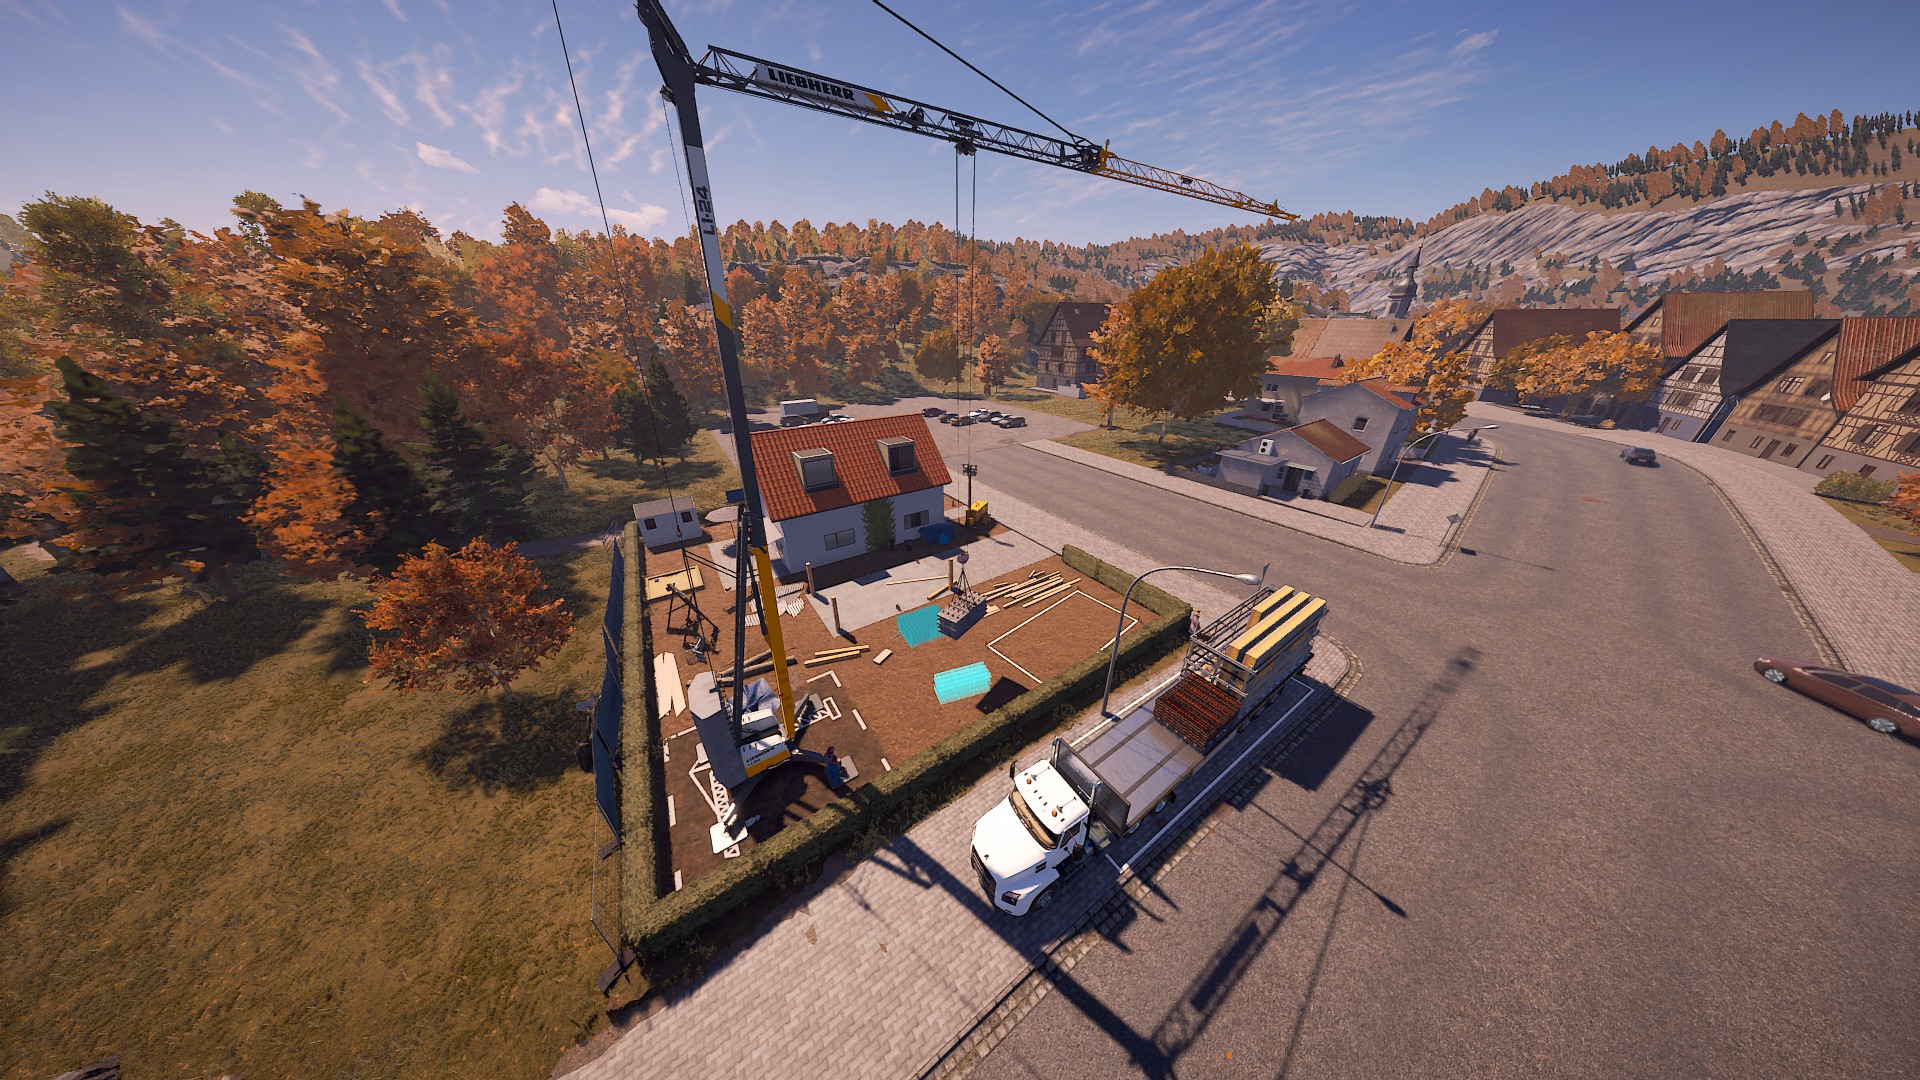 Construction Simulator review — All grit, no glamour